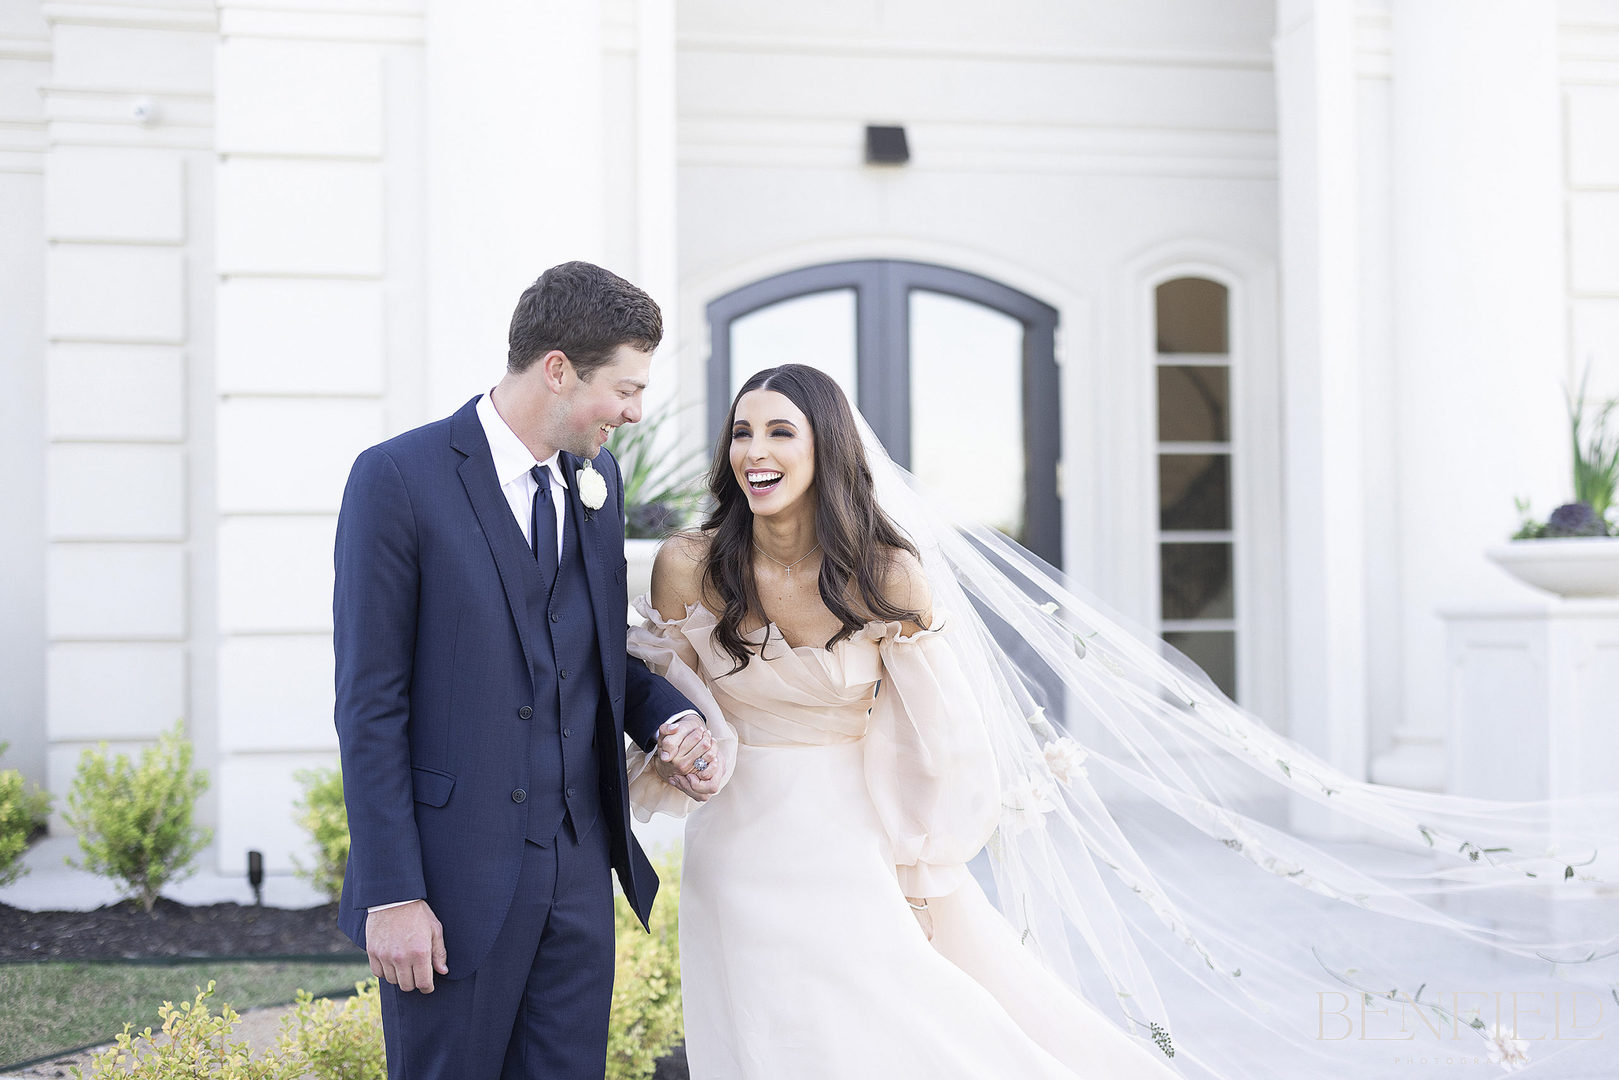 couple laughing outside The Hillside Estate Wedding venue in DFW. The bride's veil is blowing in the wind and you can see the estate behind them.